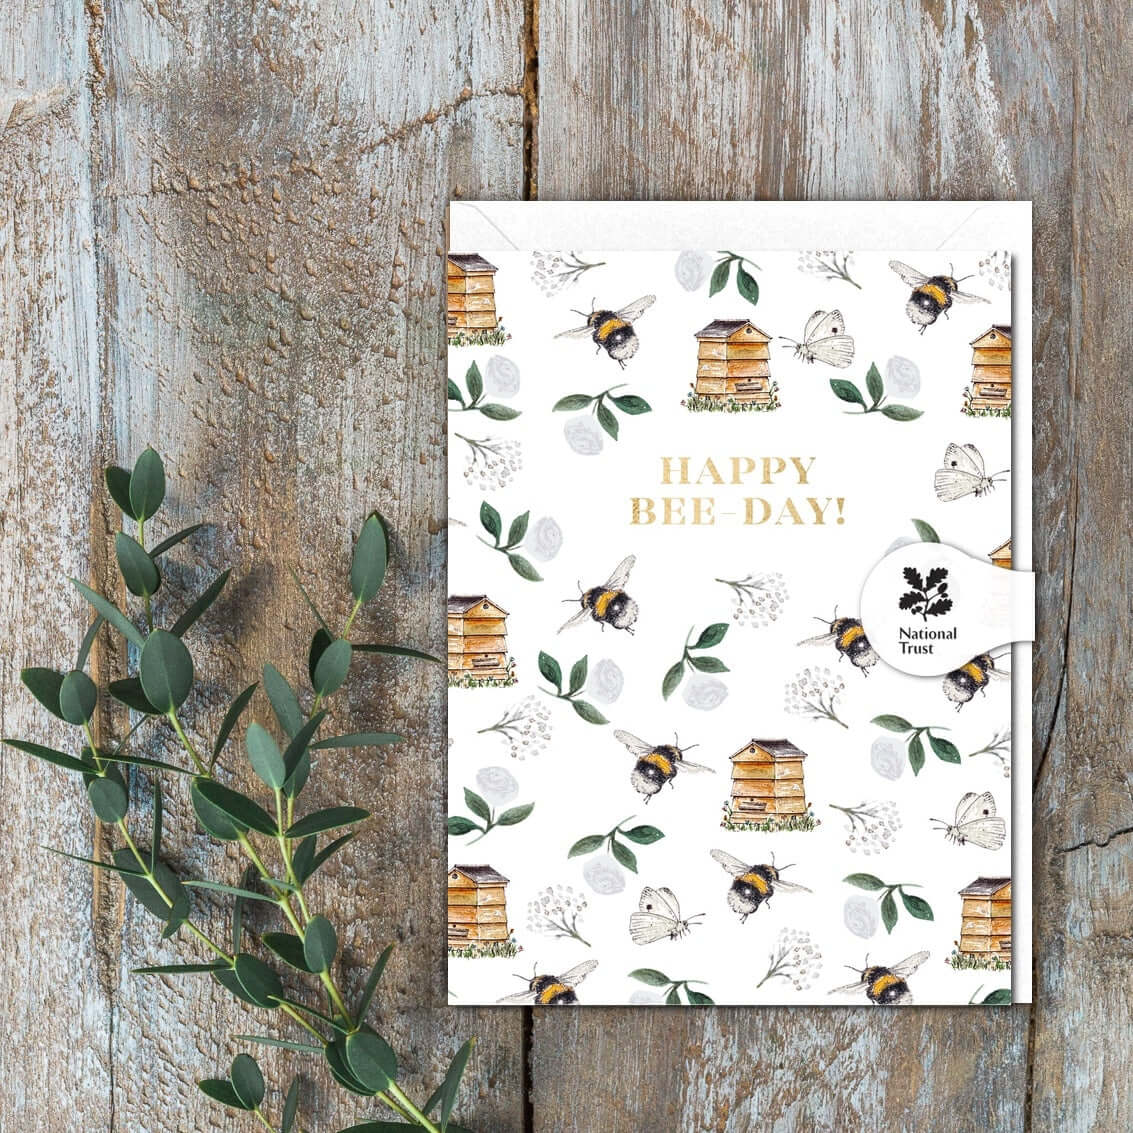 Happy Bee-Day! 'Bees & Beehives' Card (Cello-Free)